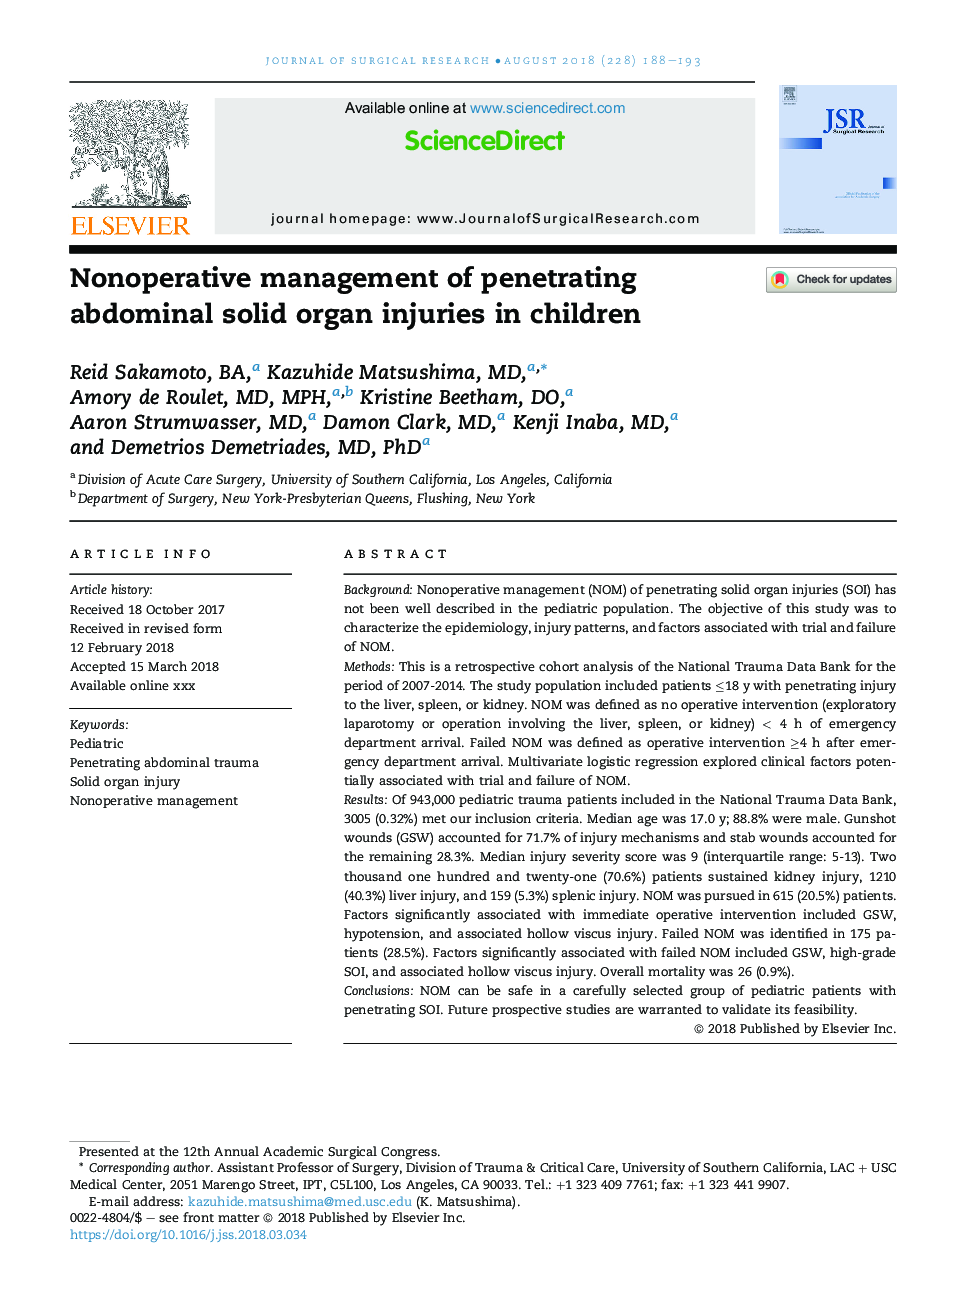 Nonoperative management of penetrating abdominal solid organ injuries in children